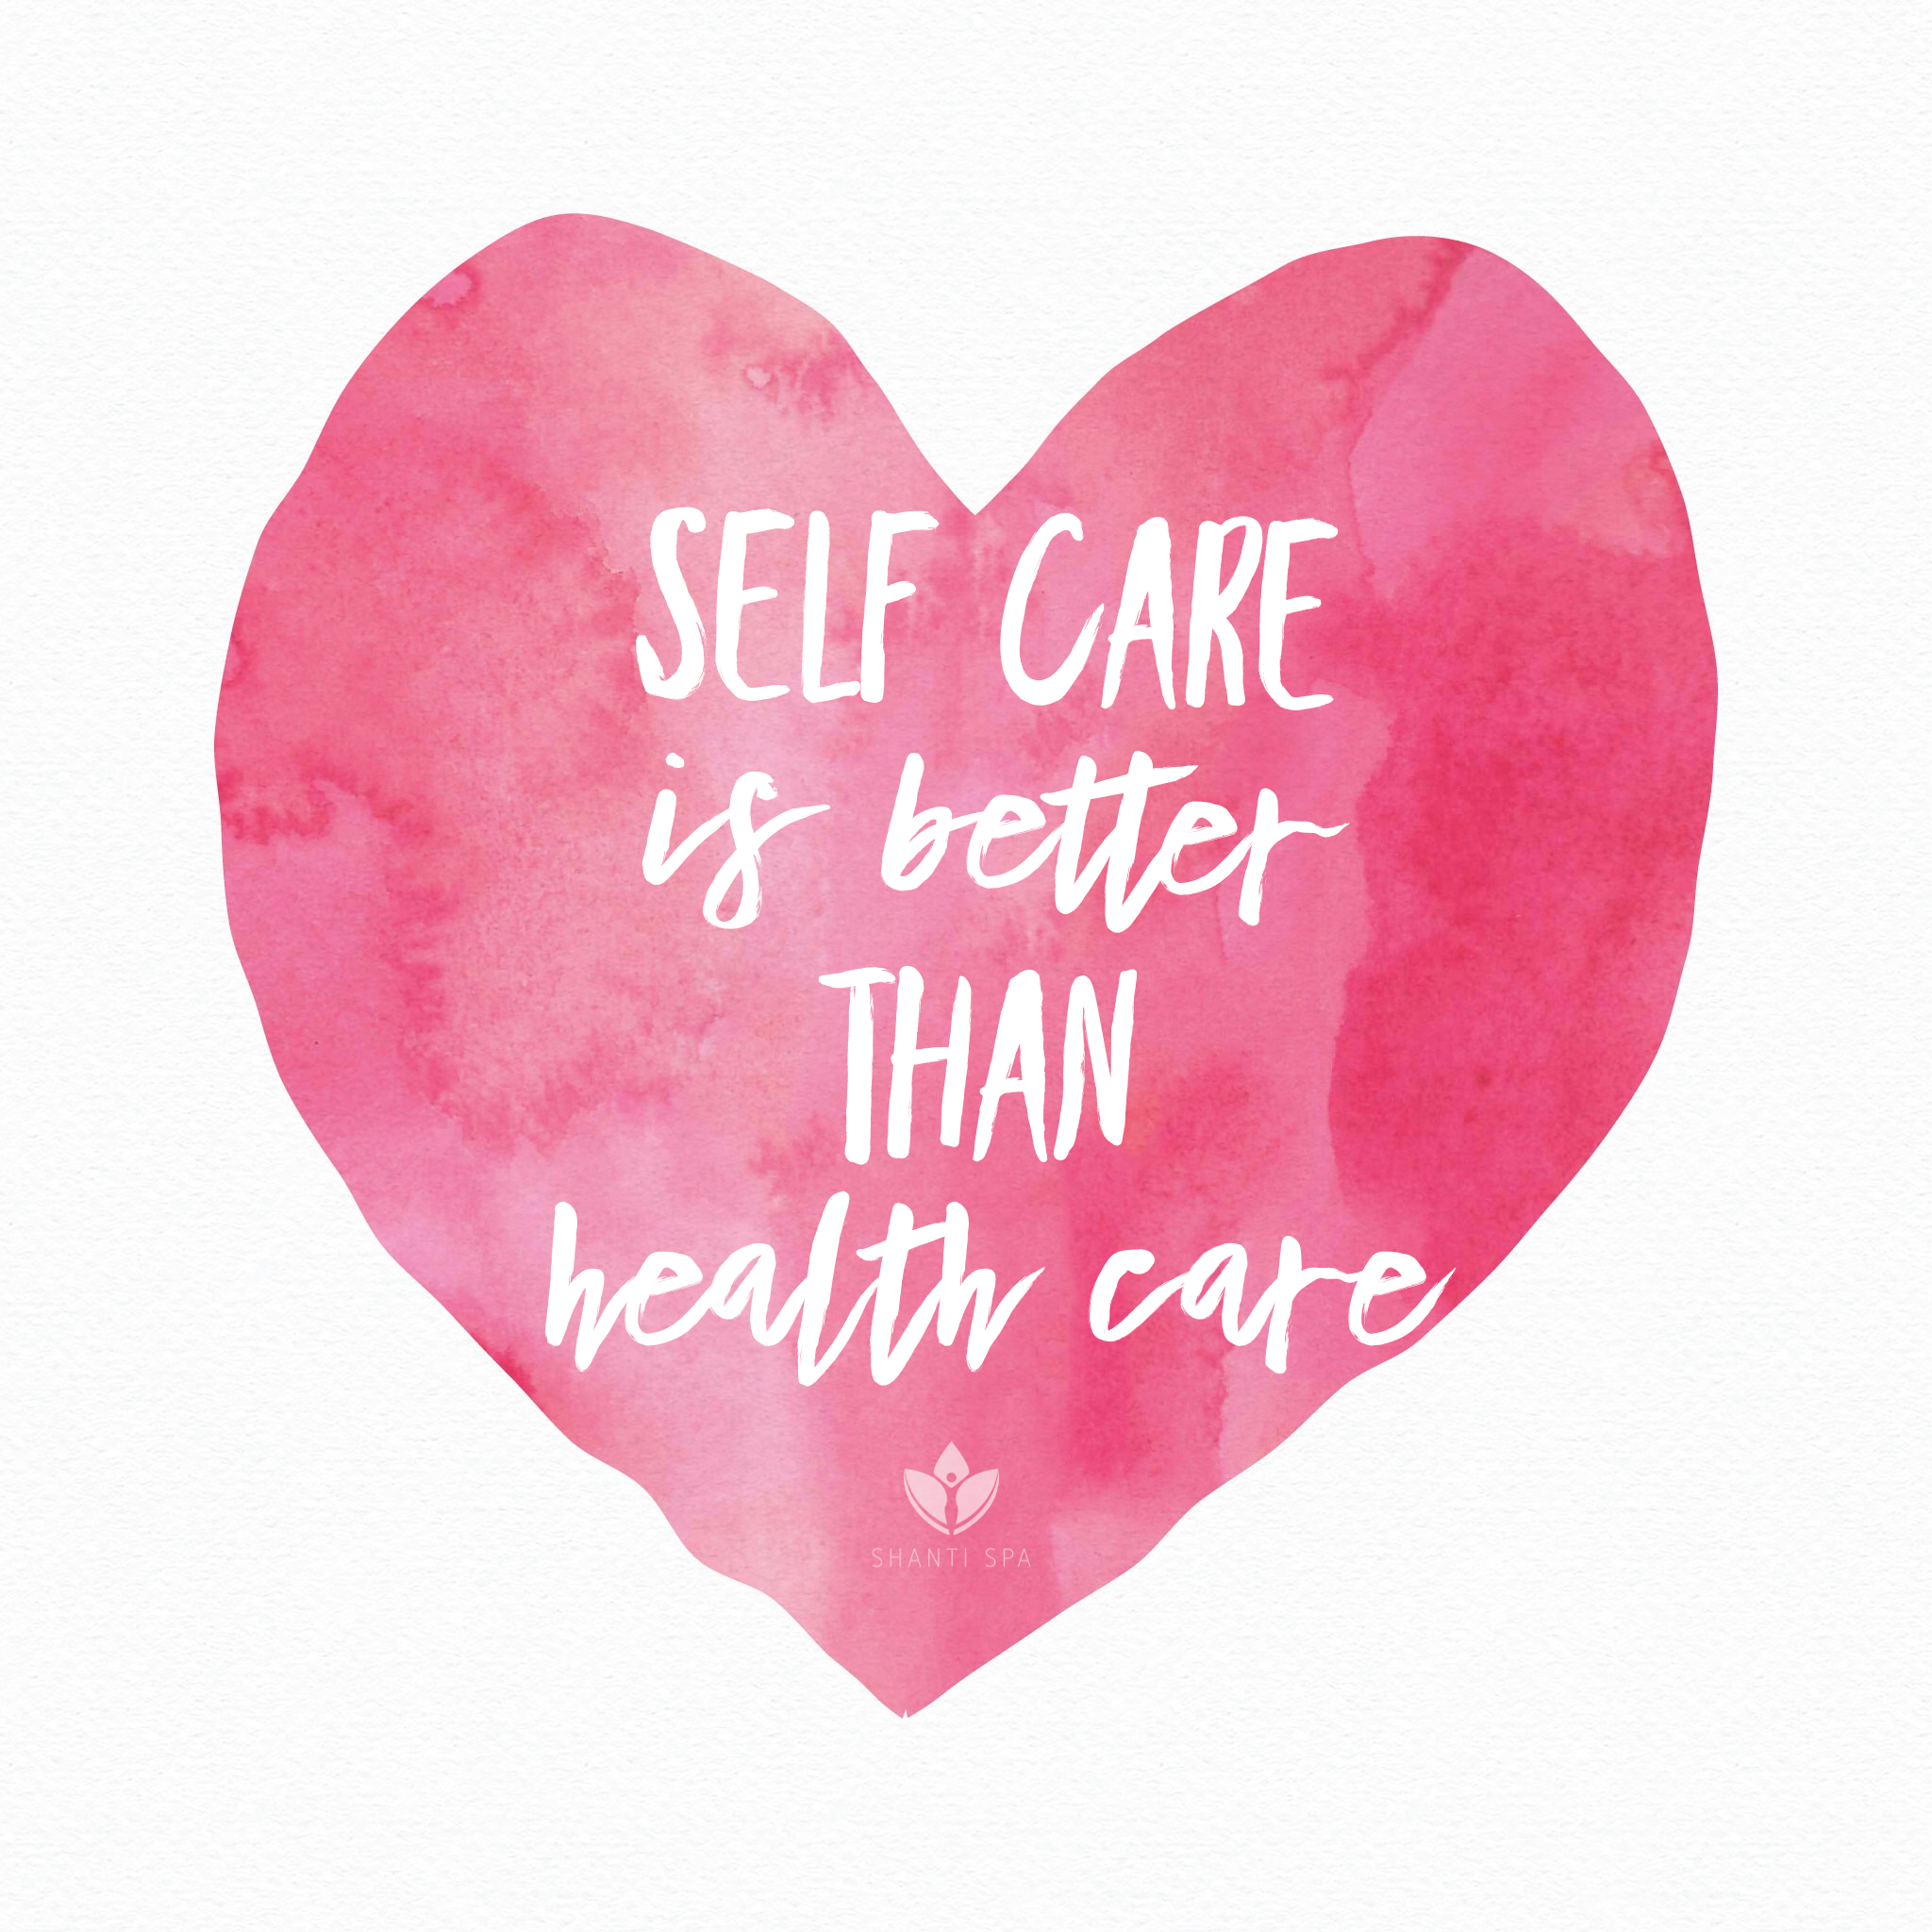 5 Quick and Easy Self Care Activities